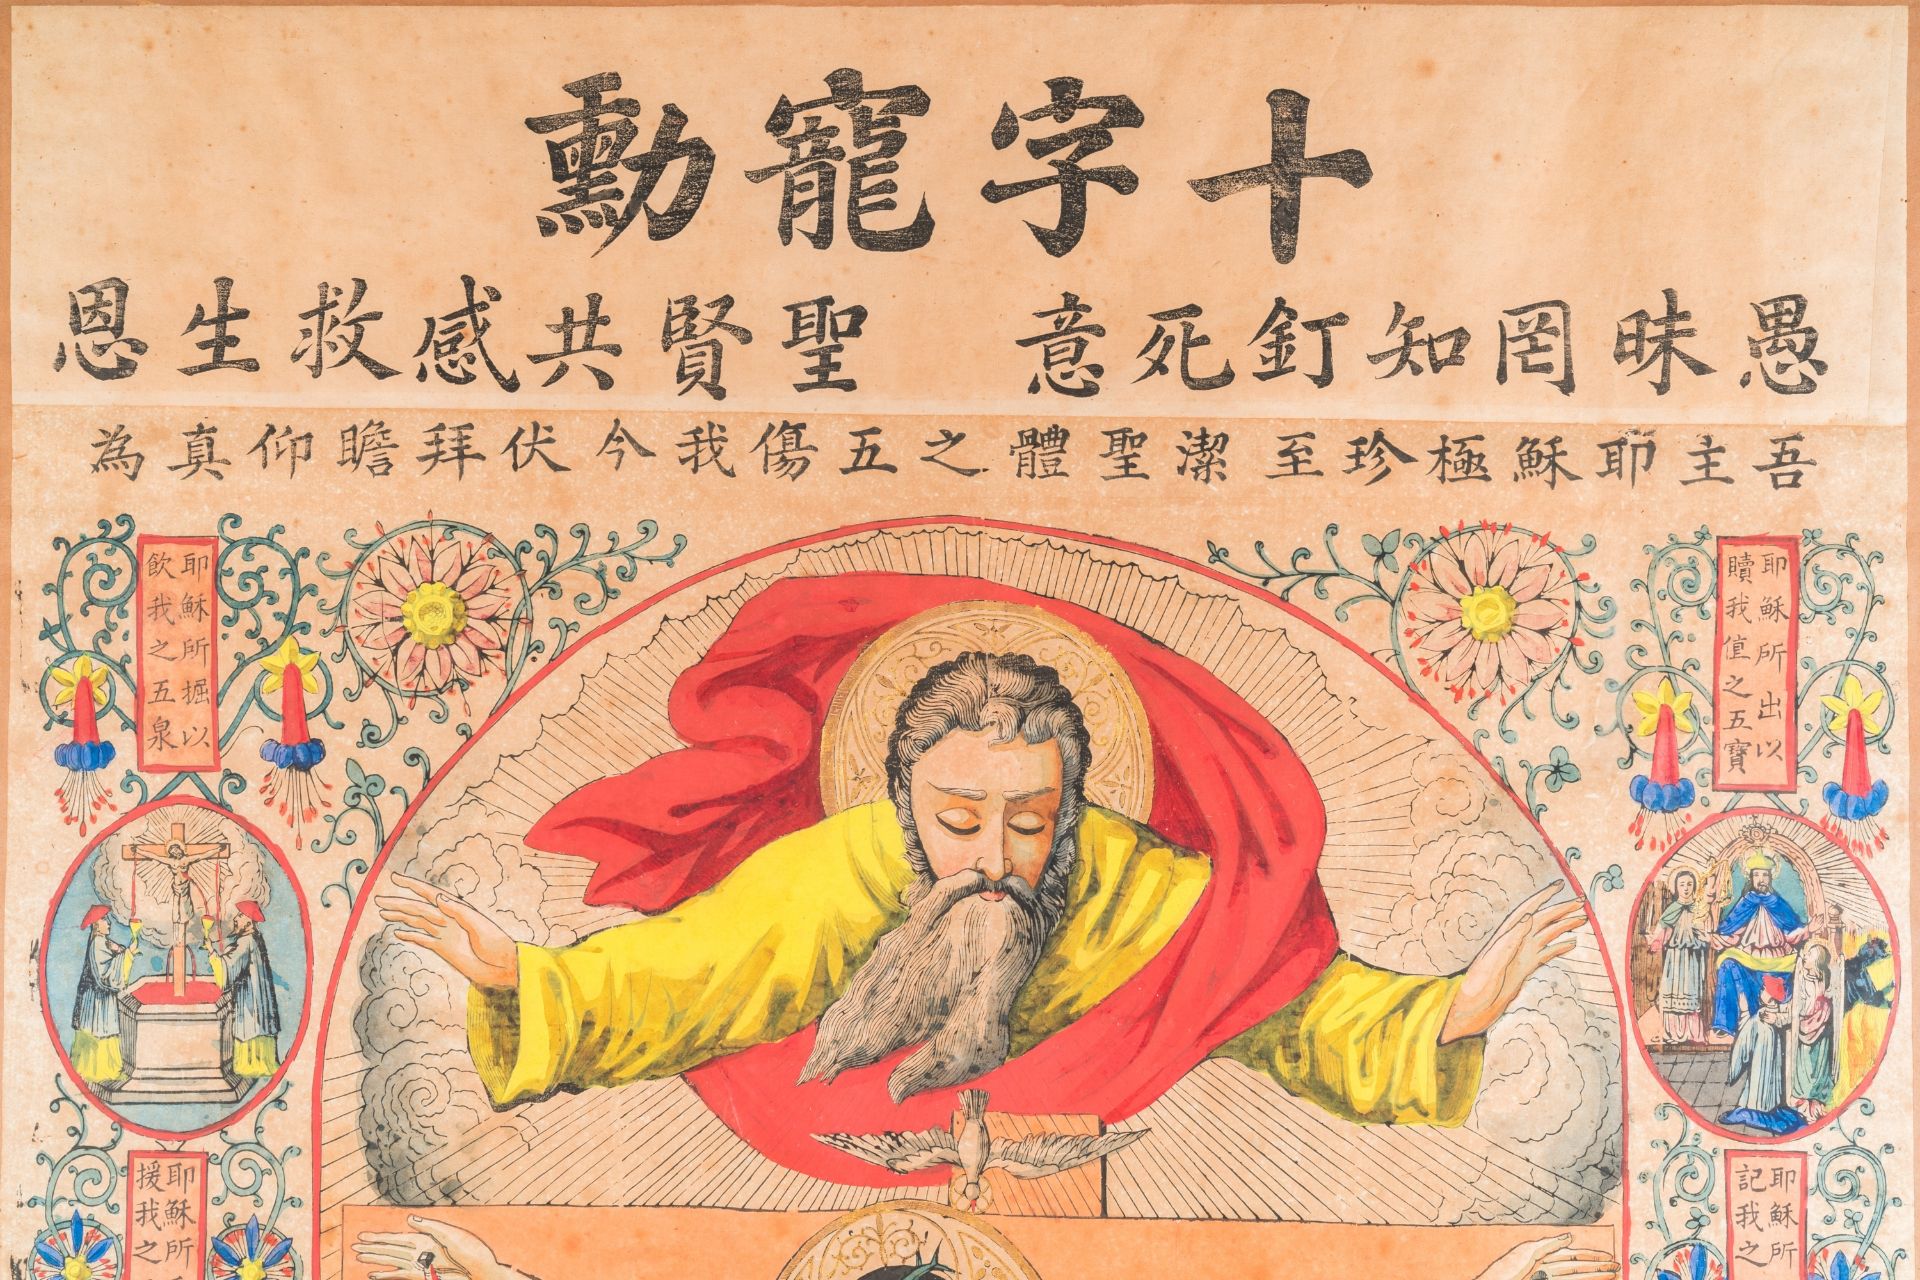 Belgian Catholic missionaries in China: 'The five wounds of Christ', engraving with painted details - Image 3 of 6